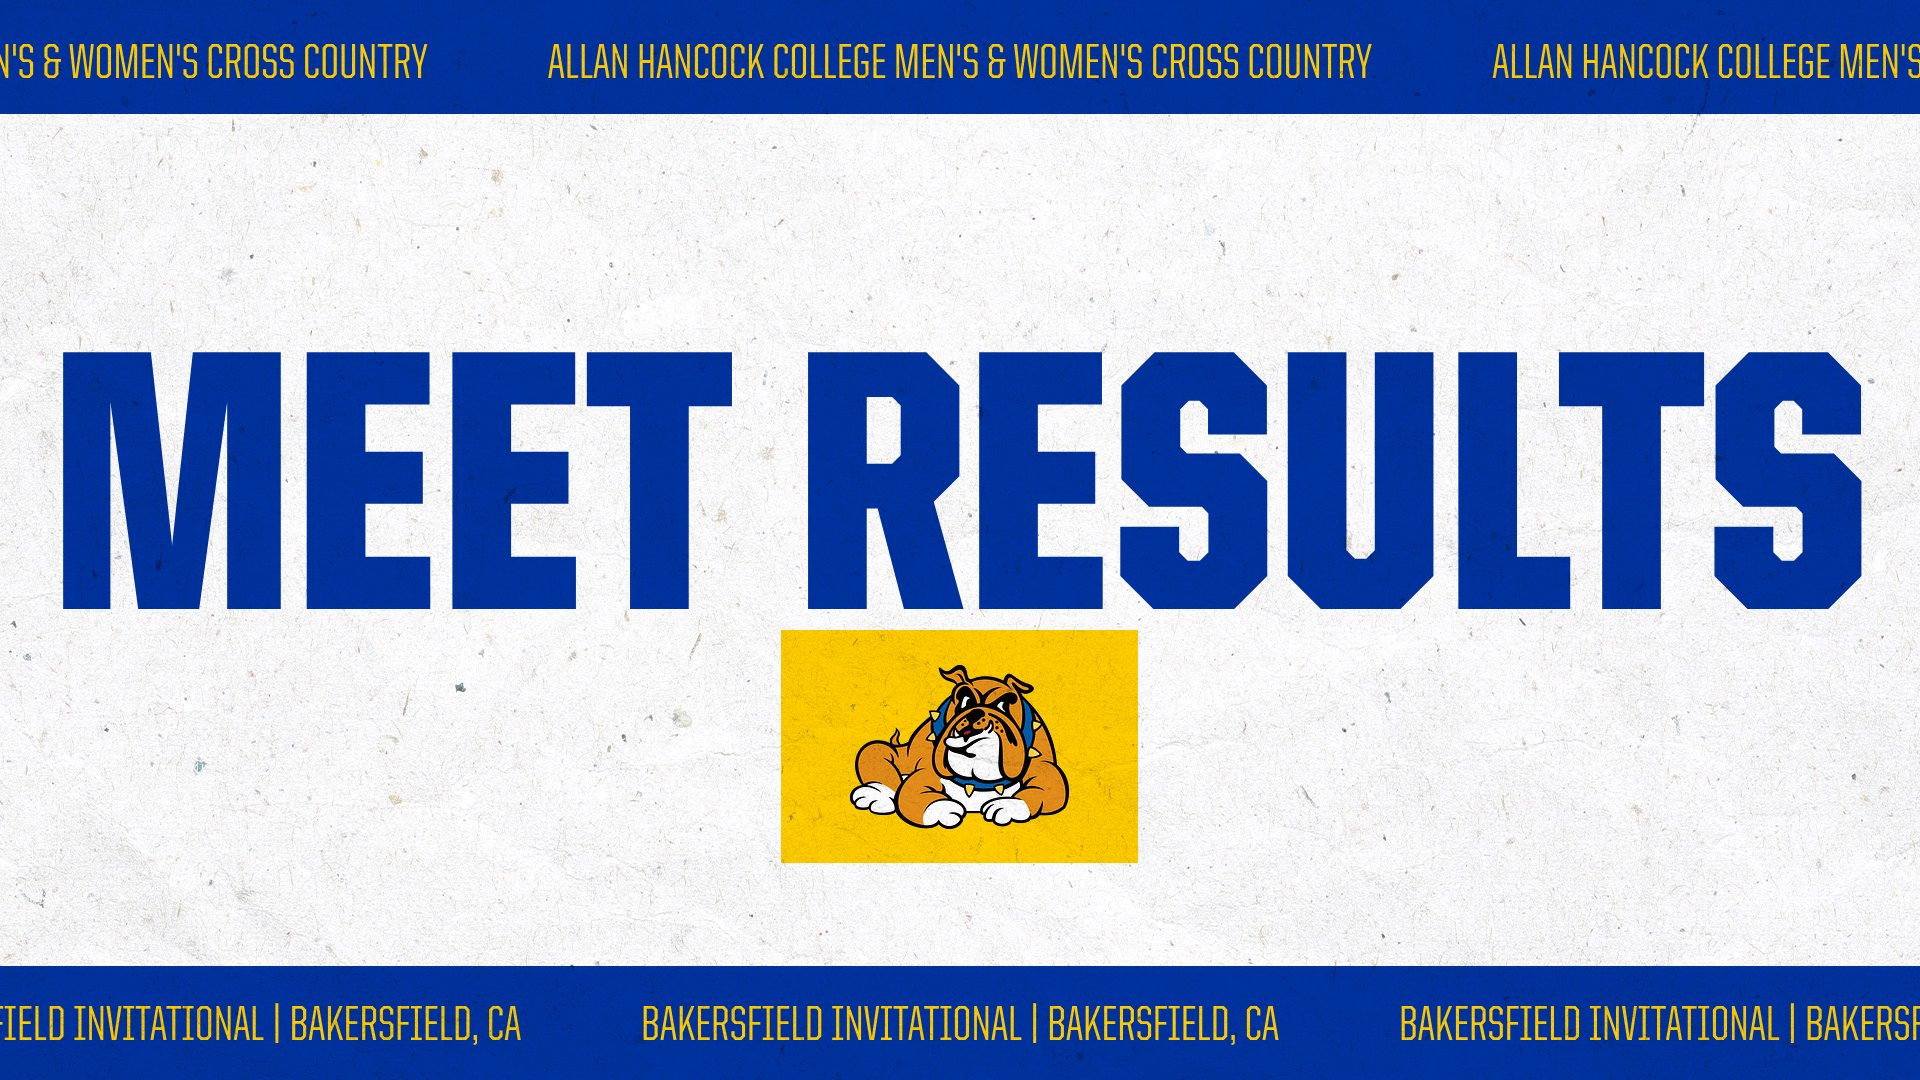 Cross Country Competes at Bakersfield Invitational